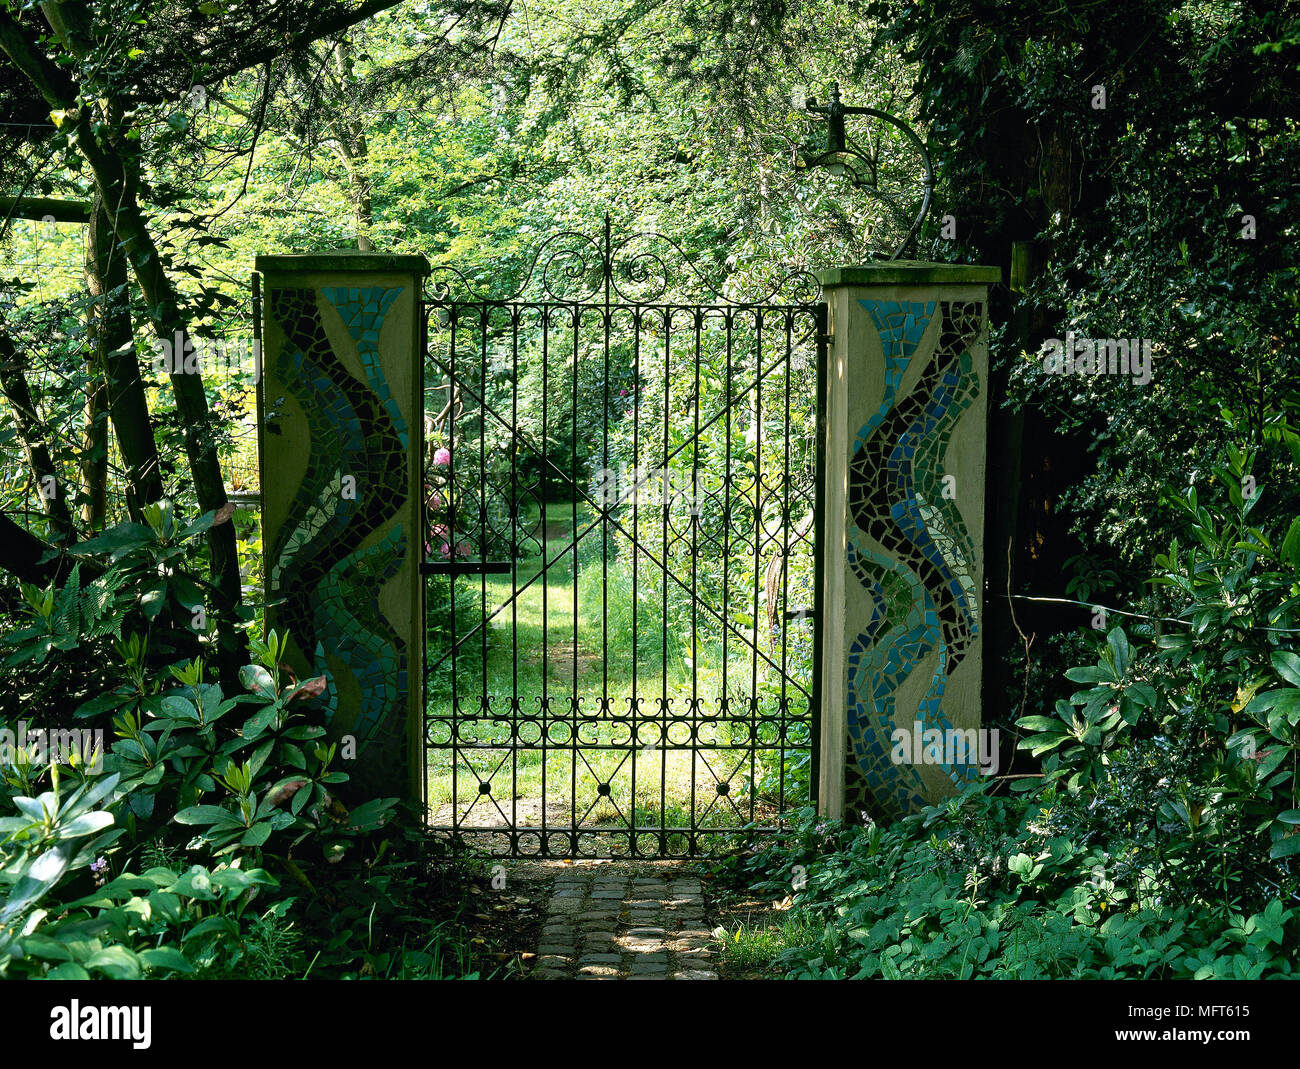 Wrought iron gates with pillars decorated with mosaic tiles in a shady garden, Stock Photo